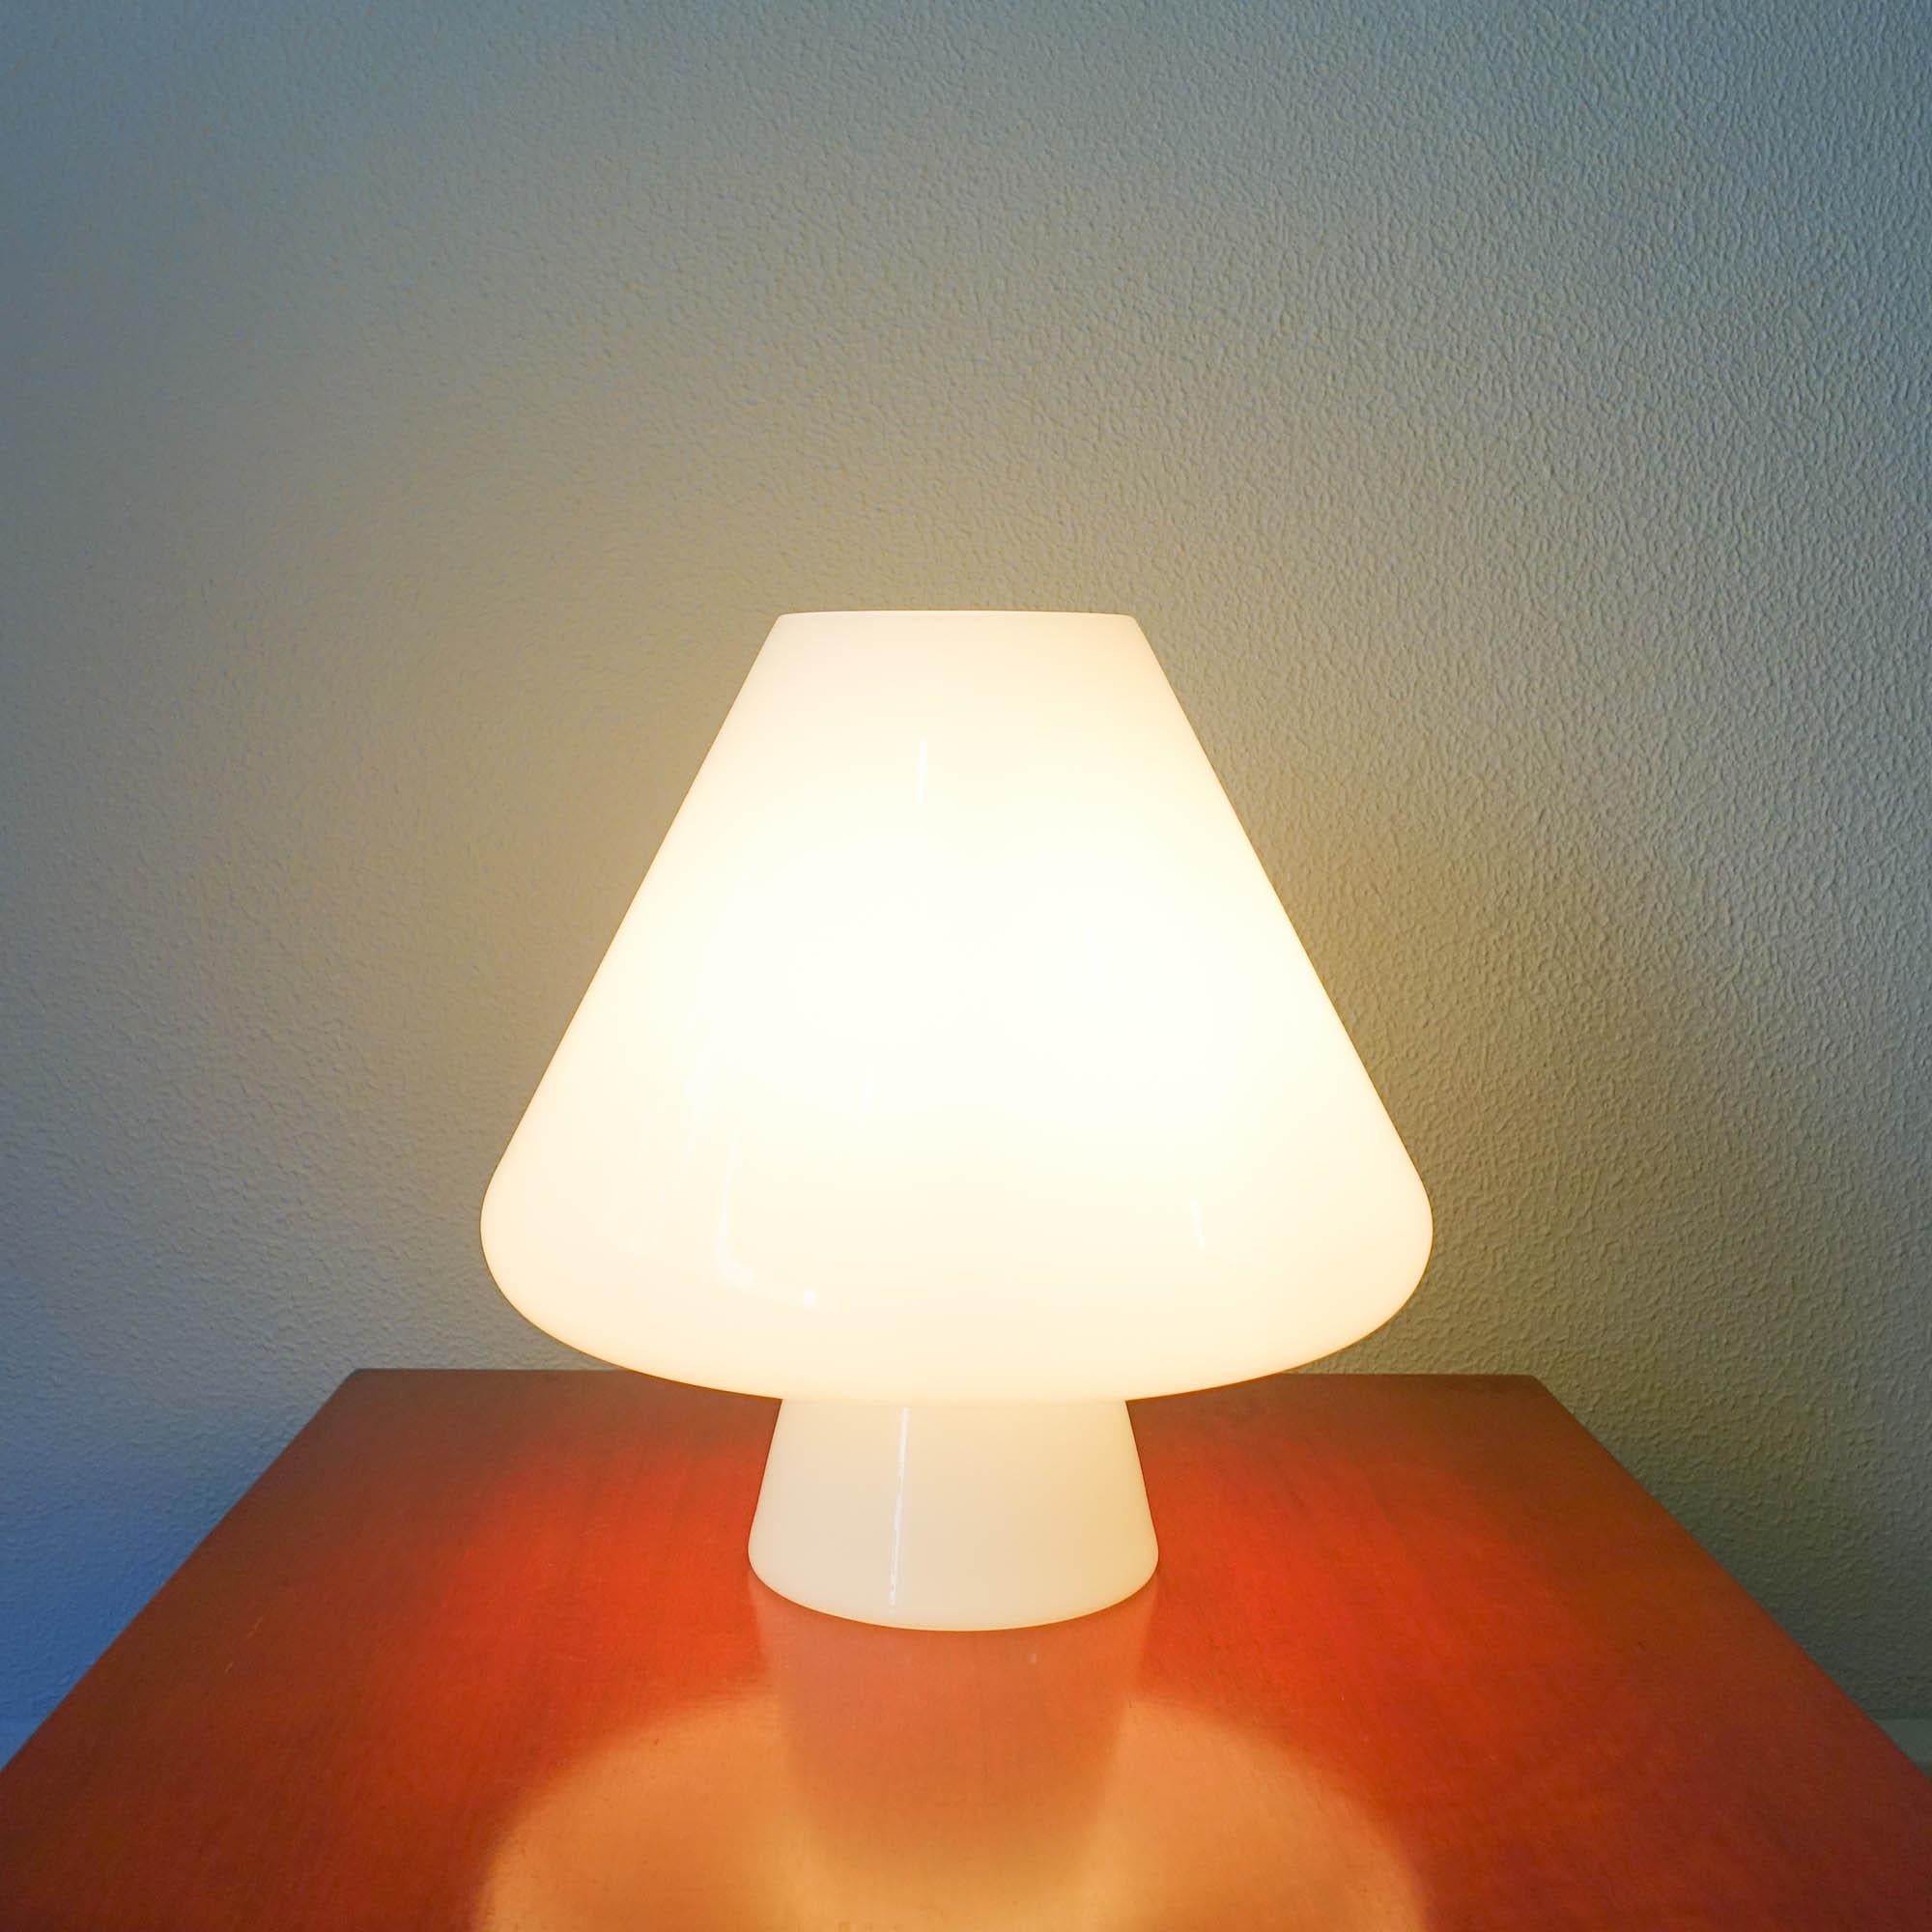 This table lamp was designed and produced by Venini, in Italy, during 1960's. It is just one piece, made in opaline glass with a mushroom shape. It is in the original and good condition.